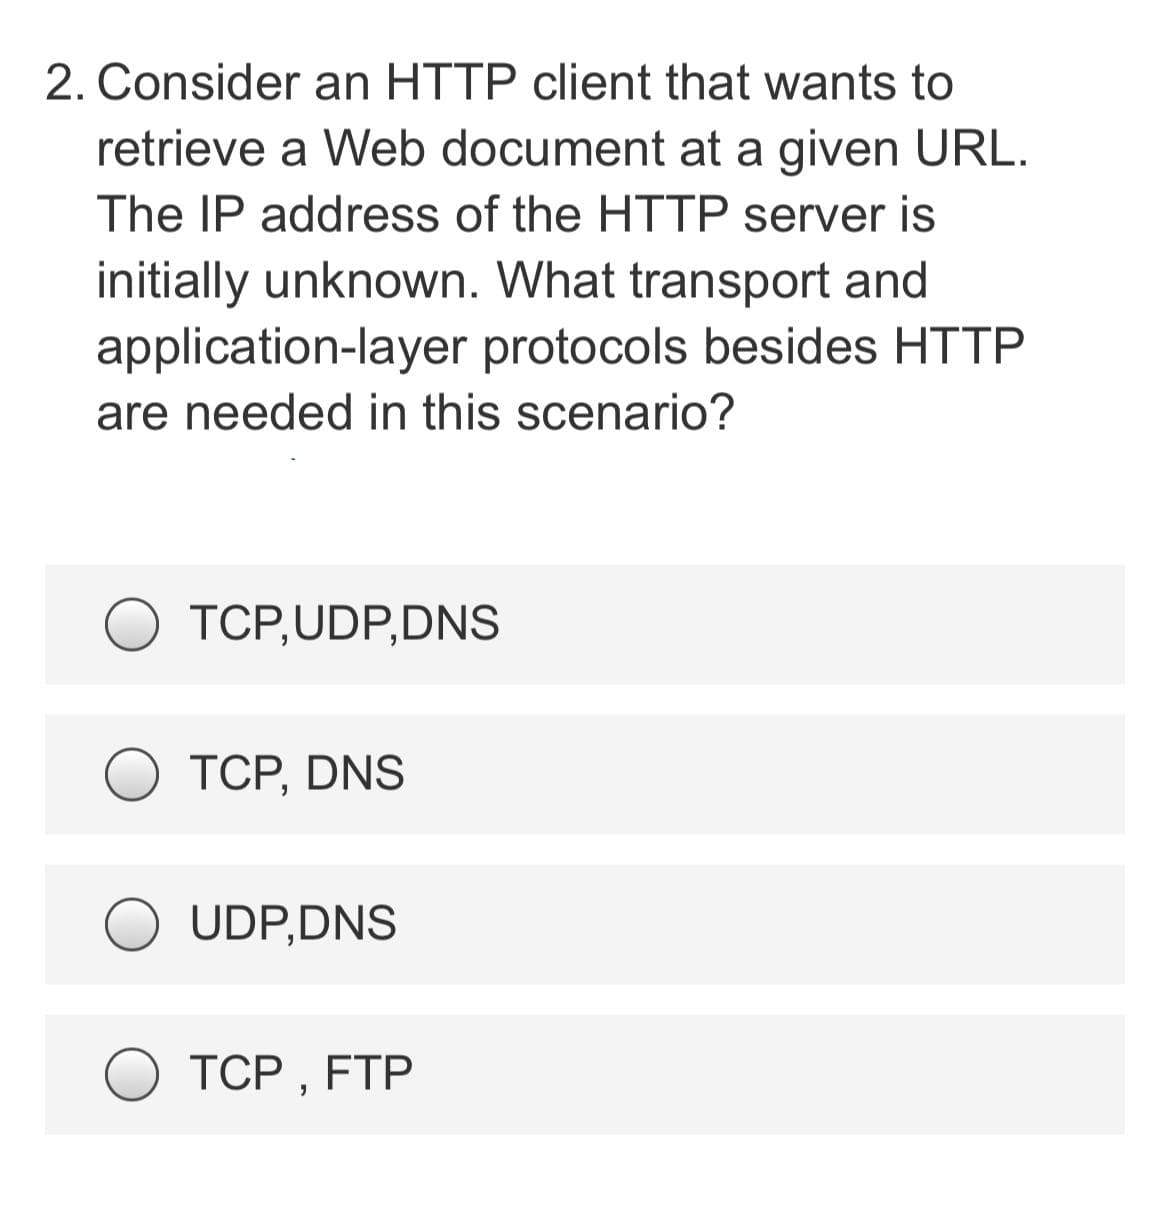 2. Consider an HTTP client that wants to
retrieve a Web document at a given URL.
The IP address of the HTTP server is
initially unknown. What transport and
application-layer protocols besides HTTP
are needed in this scenario?
O TCP,UDP,DNS
ТСР, DNS
UDP,DNS
ТСР, FTP
